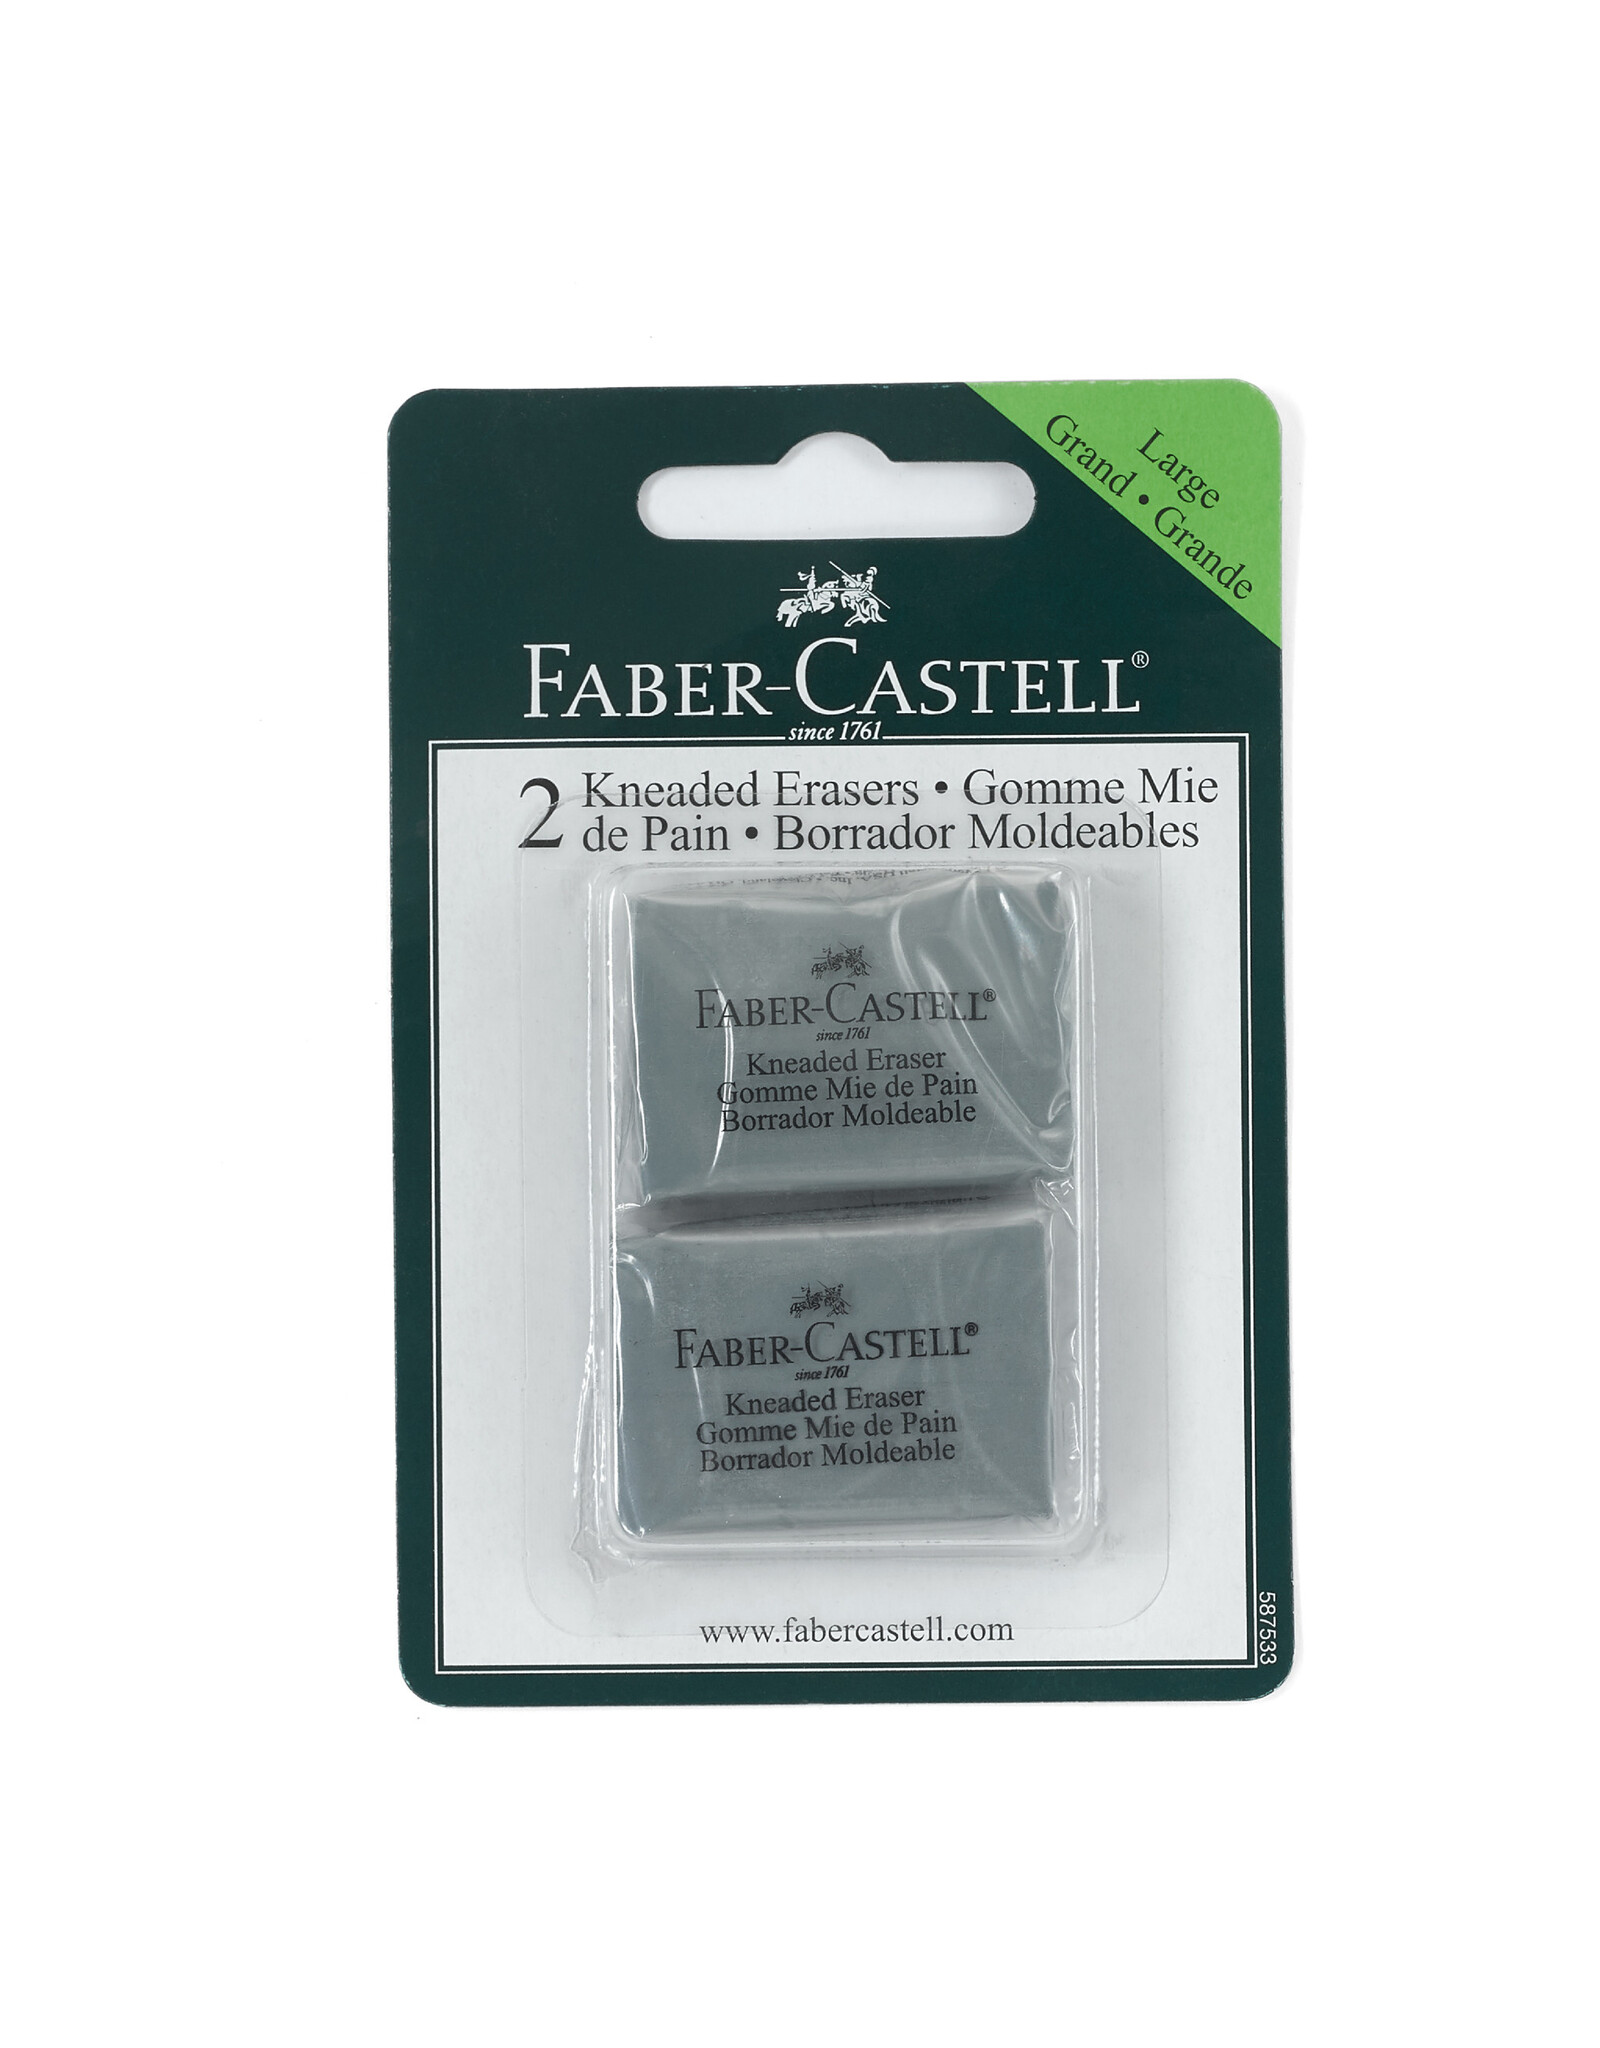 FABER-CASTELL Faber Castell Kneadable Eraser, Set of 2, Grey, Carded